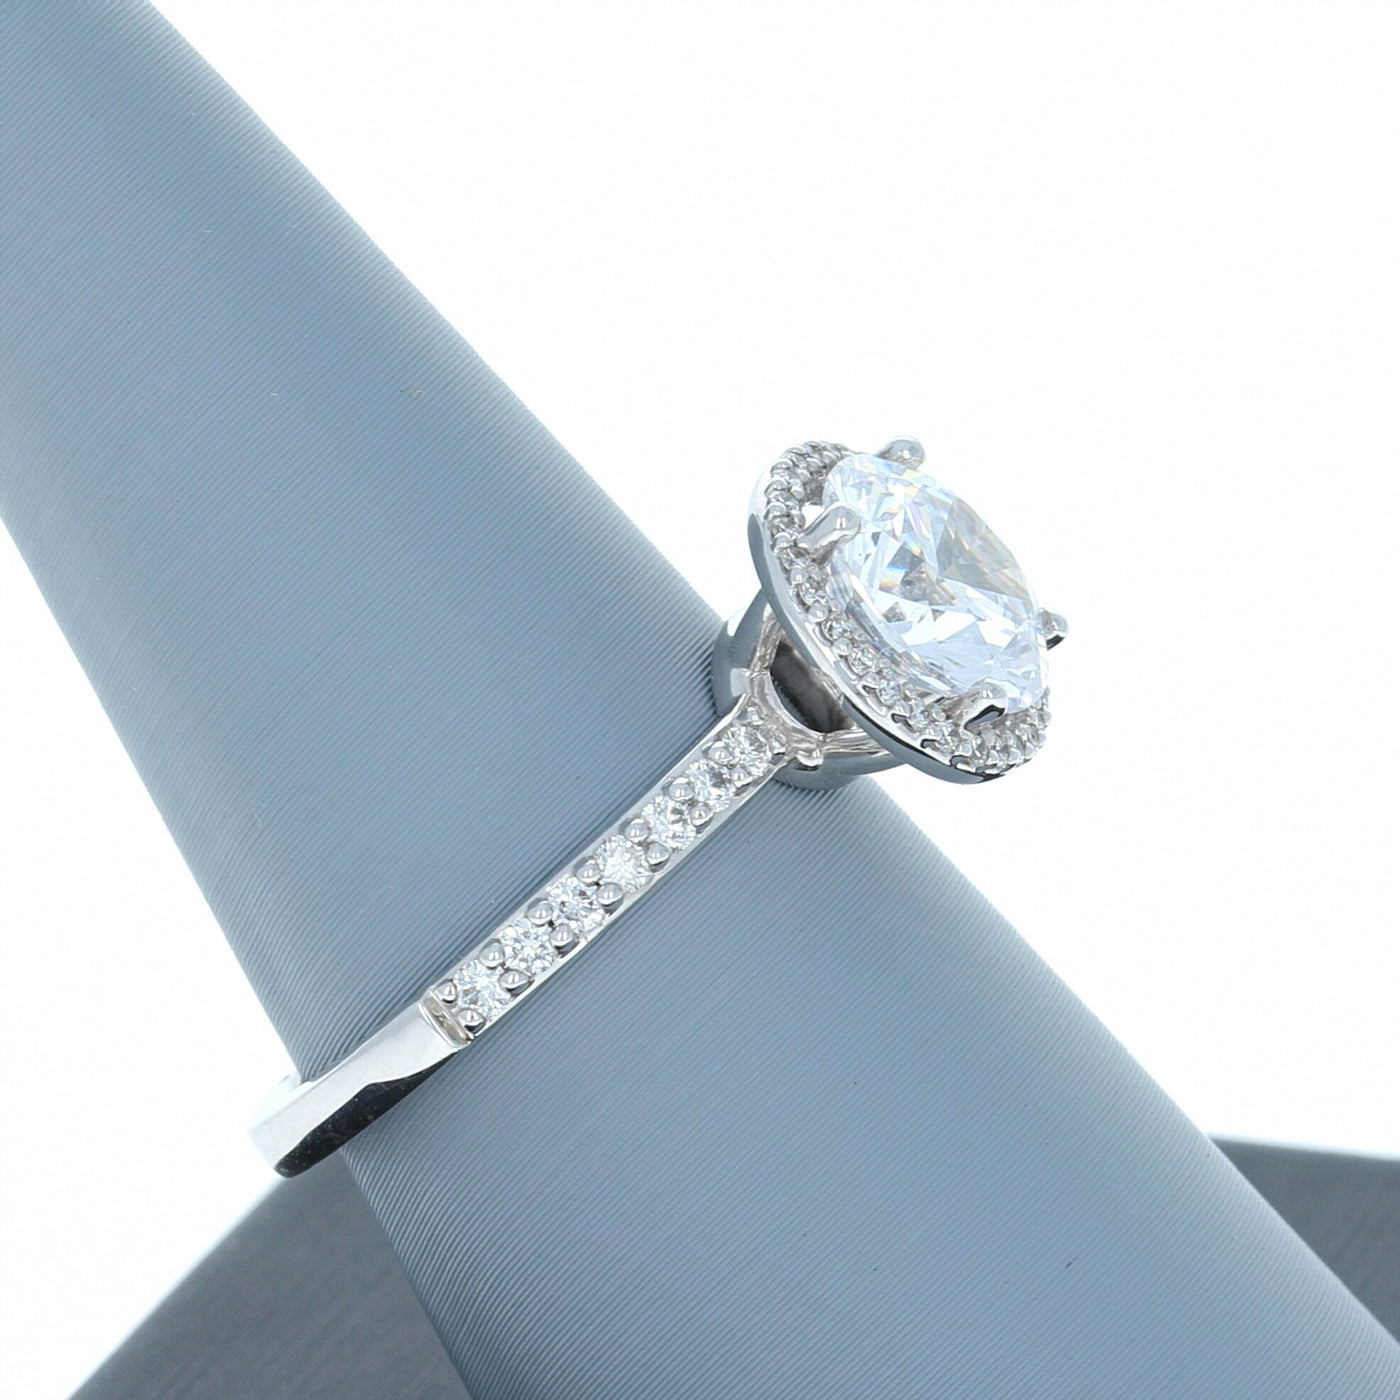 Apparel & Accessories > Jewelry > Rings A Jaffe Diamond Engagement Ring in White Gold ME1799 Pierce Custom Jewelers